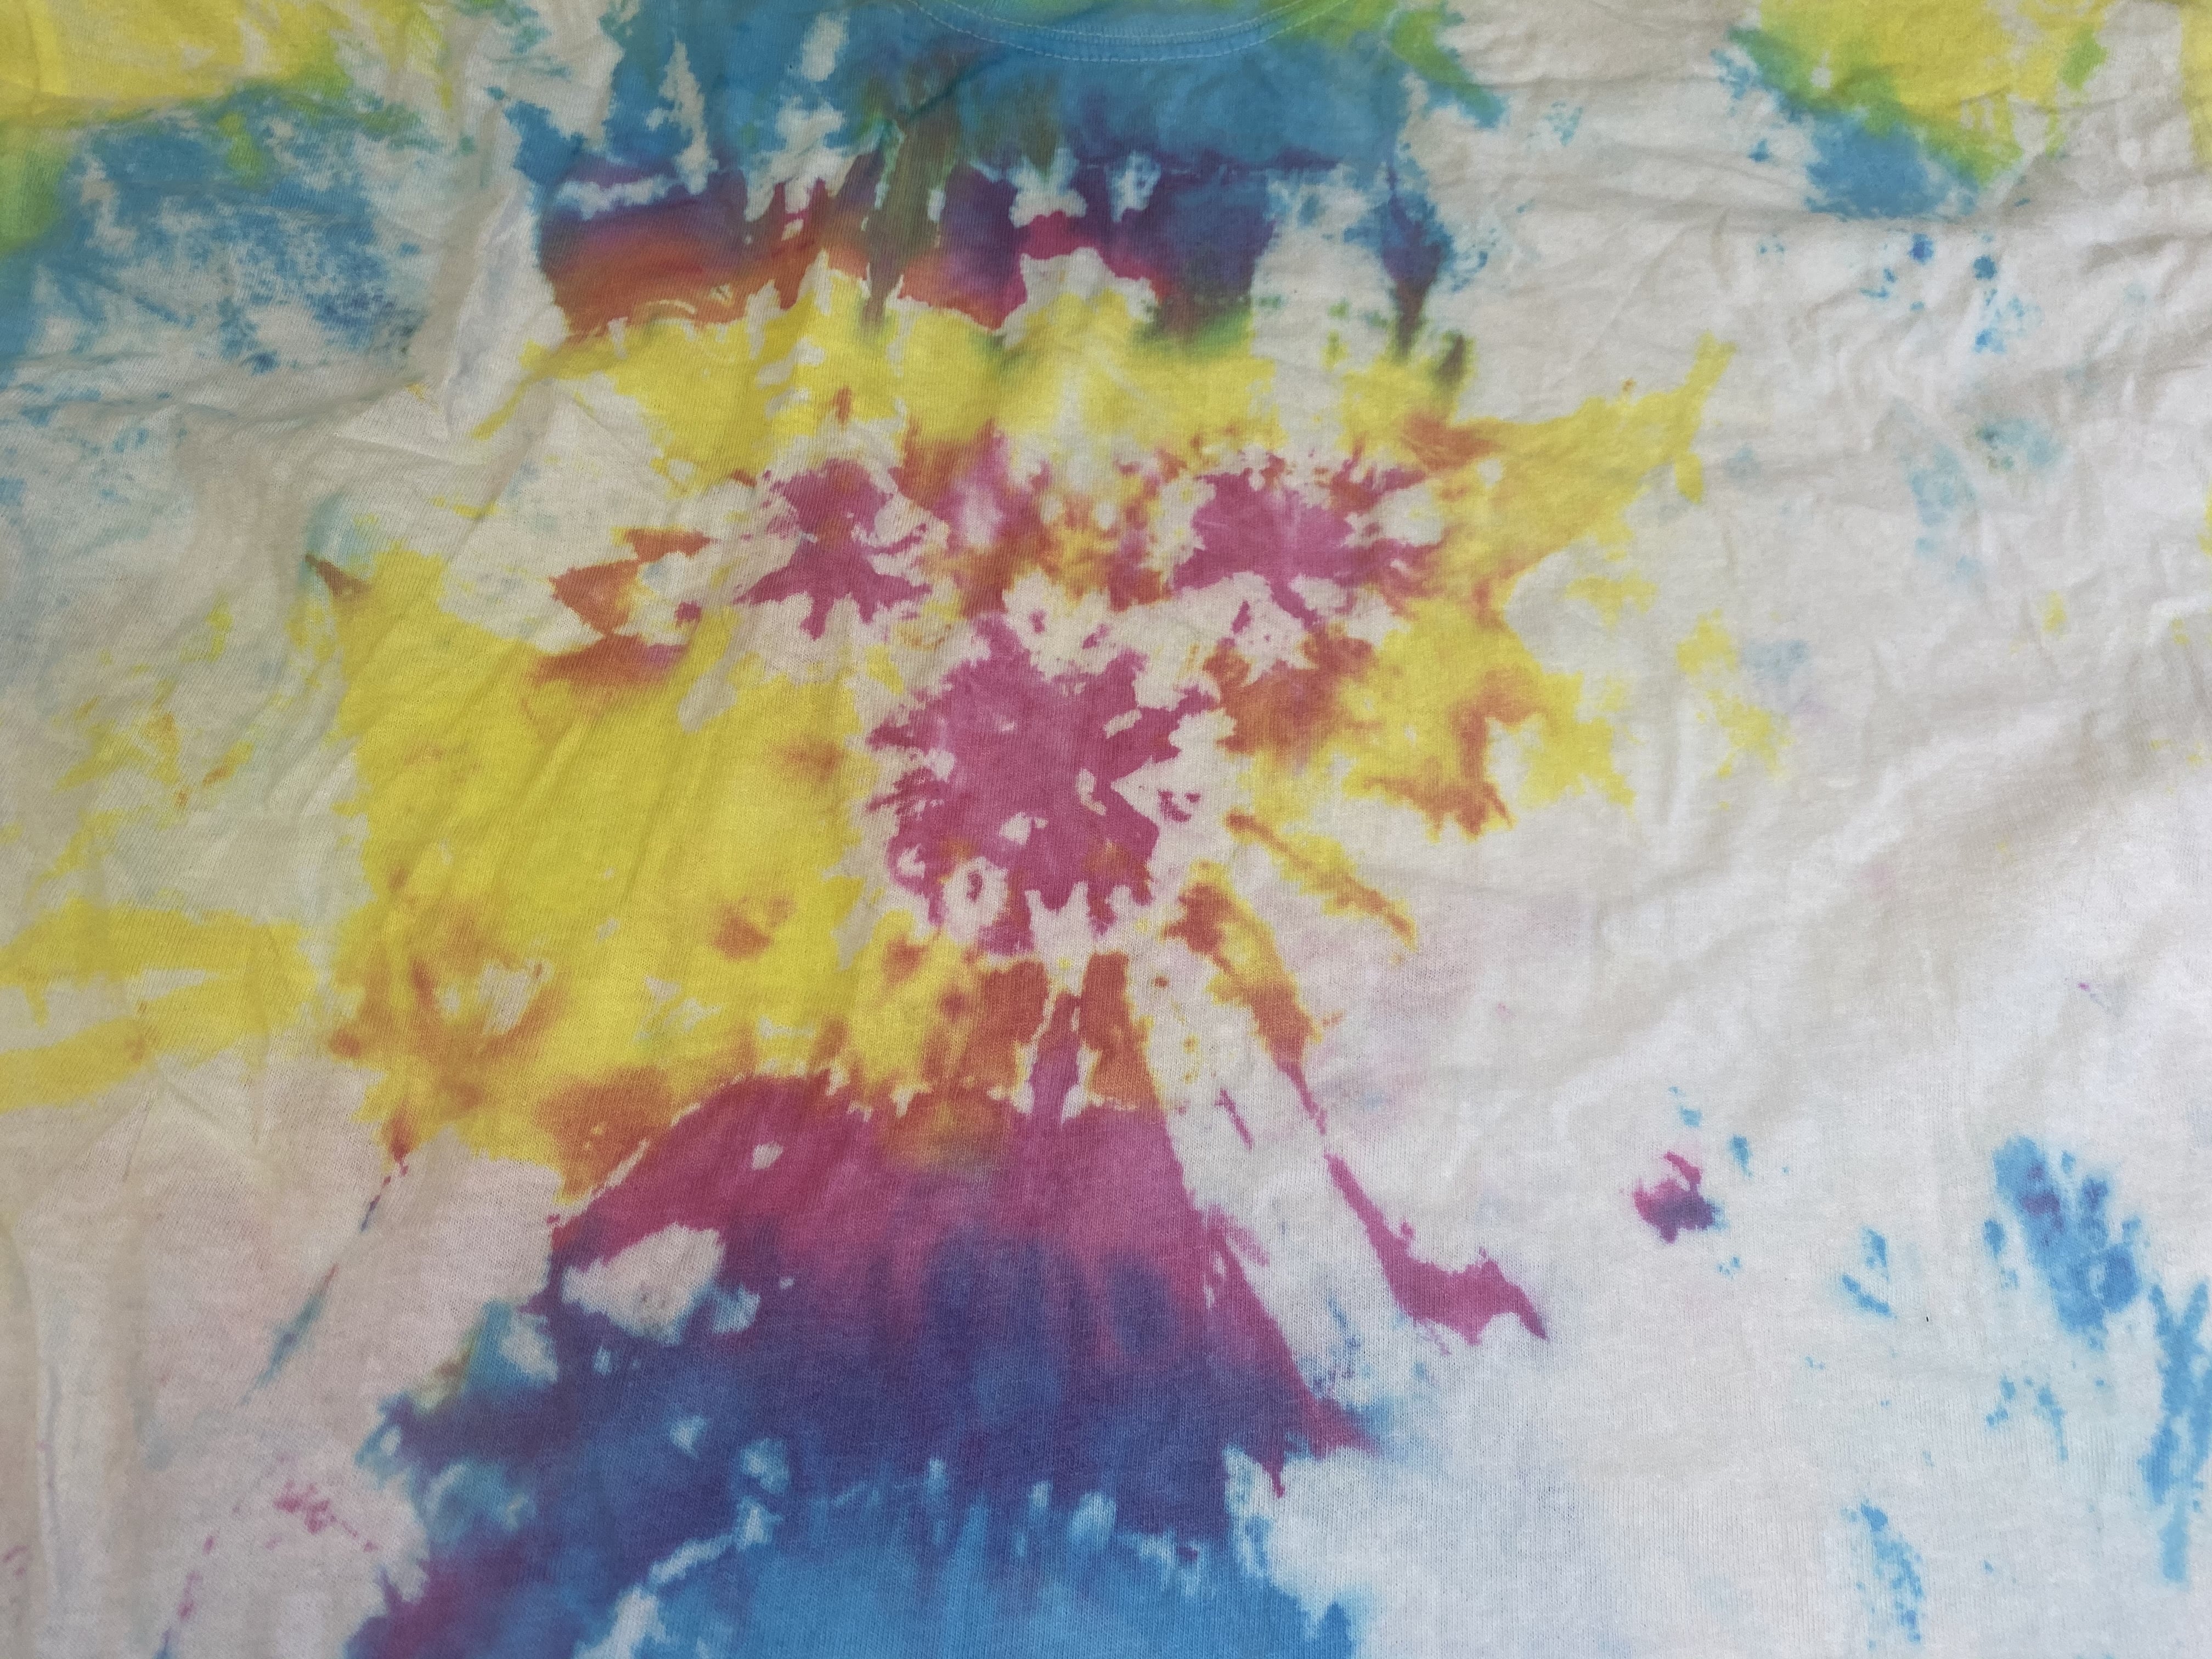 How To Make Mickey Mouse Tie Dye Shirts